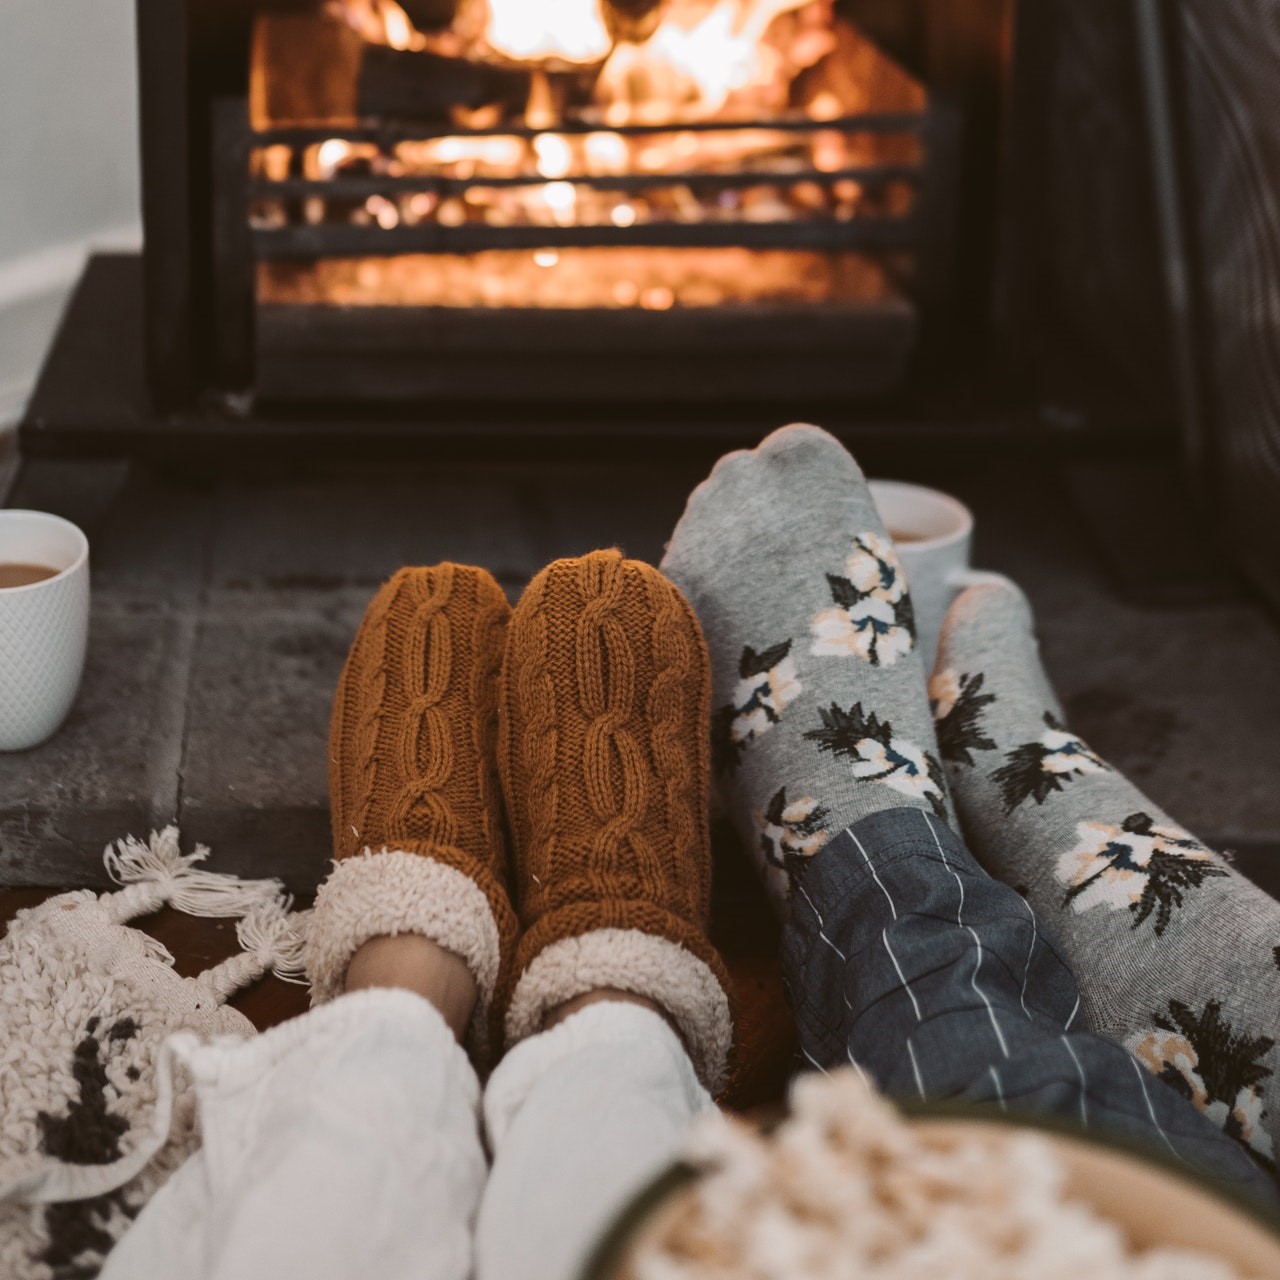 How To Prepare Your Home for Winter - Elevate Credit Union